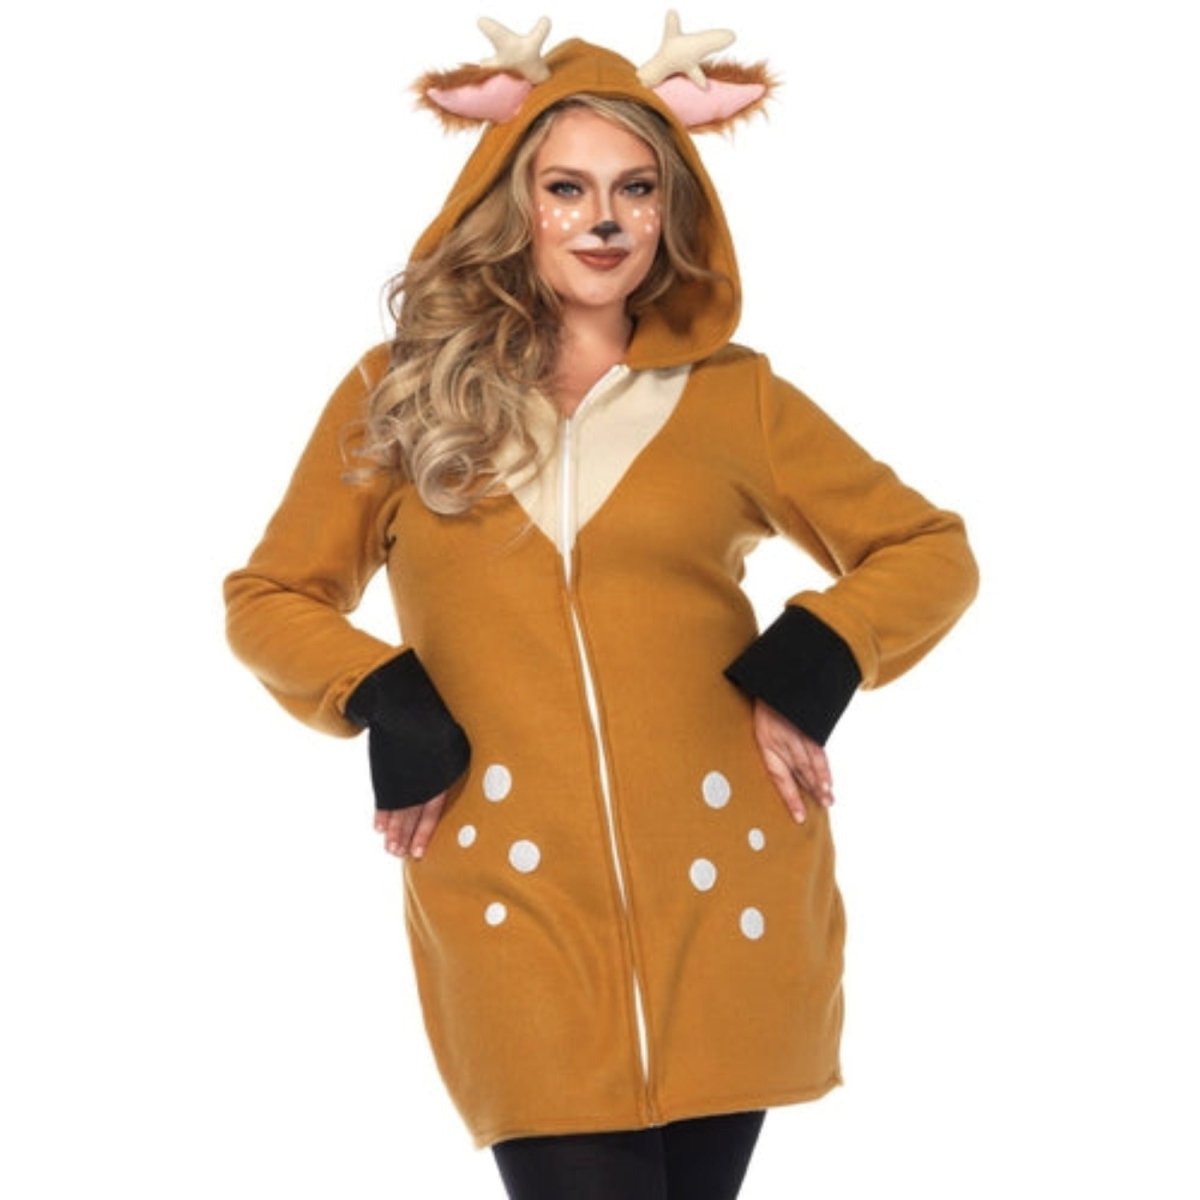 1PC Cozy Brown Fawn Costume - worldclasscostumes